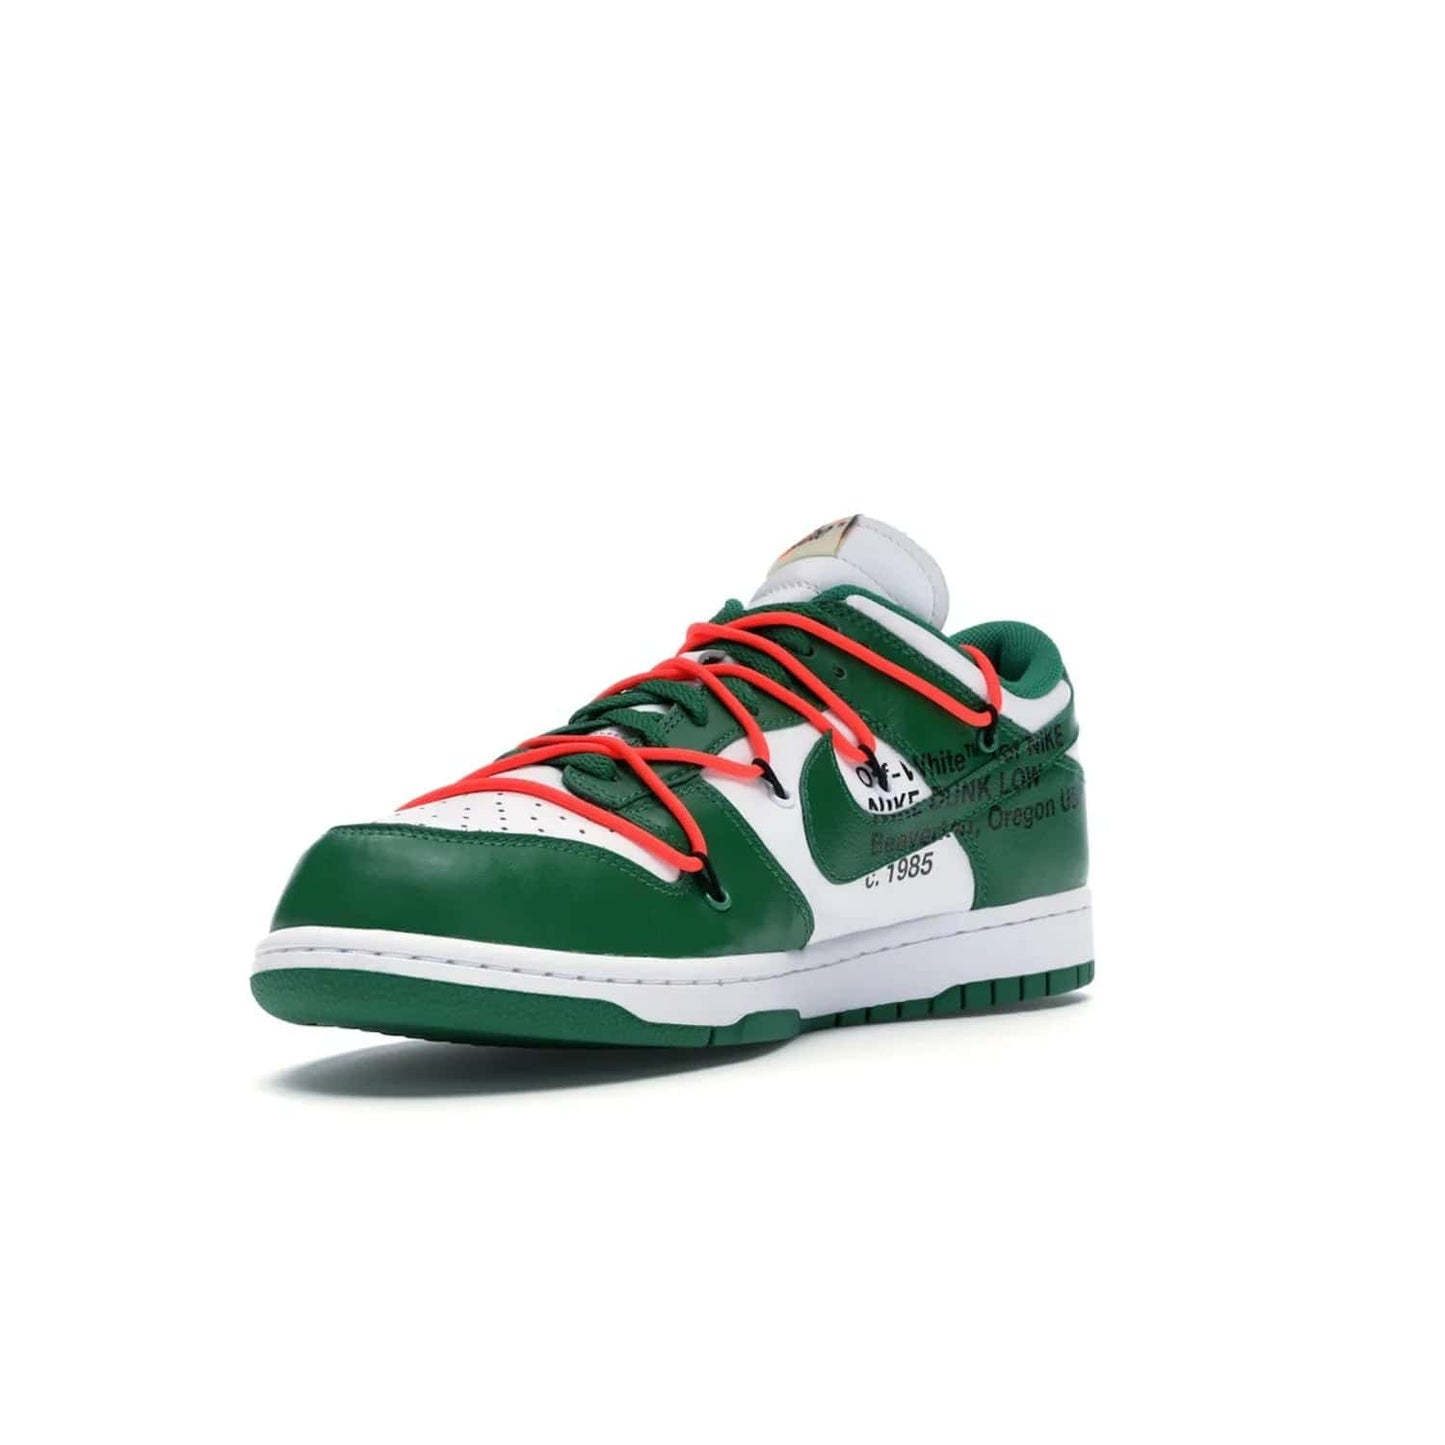 Nike Dunk Low Off-White Pine Green - Image 14 - Only at www.BallersClubKickz.com - The Nike Dunk Low Off-White Pine Green combines classic 1980s style with modern-day design. Featuring white leather uppers and pine green overlays, these classic kicks feature secondary lacing system, zip-ties and signature Off-White text. Releasing in December 2019, these shoes are a timeless classic for any wardrobe.